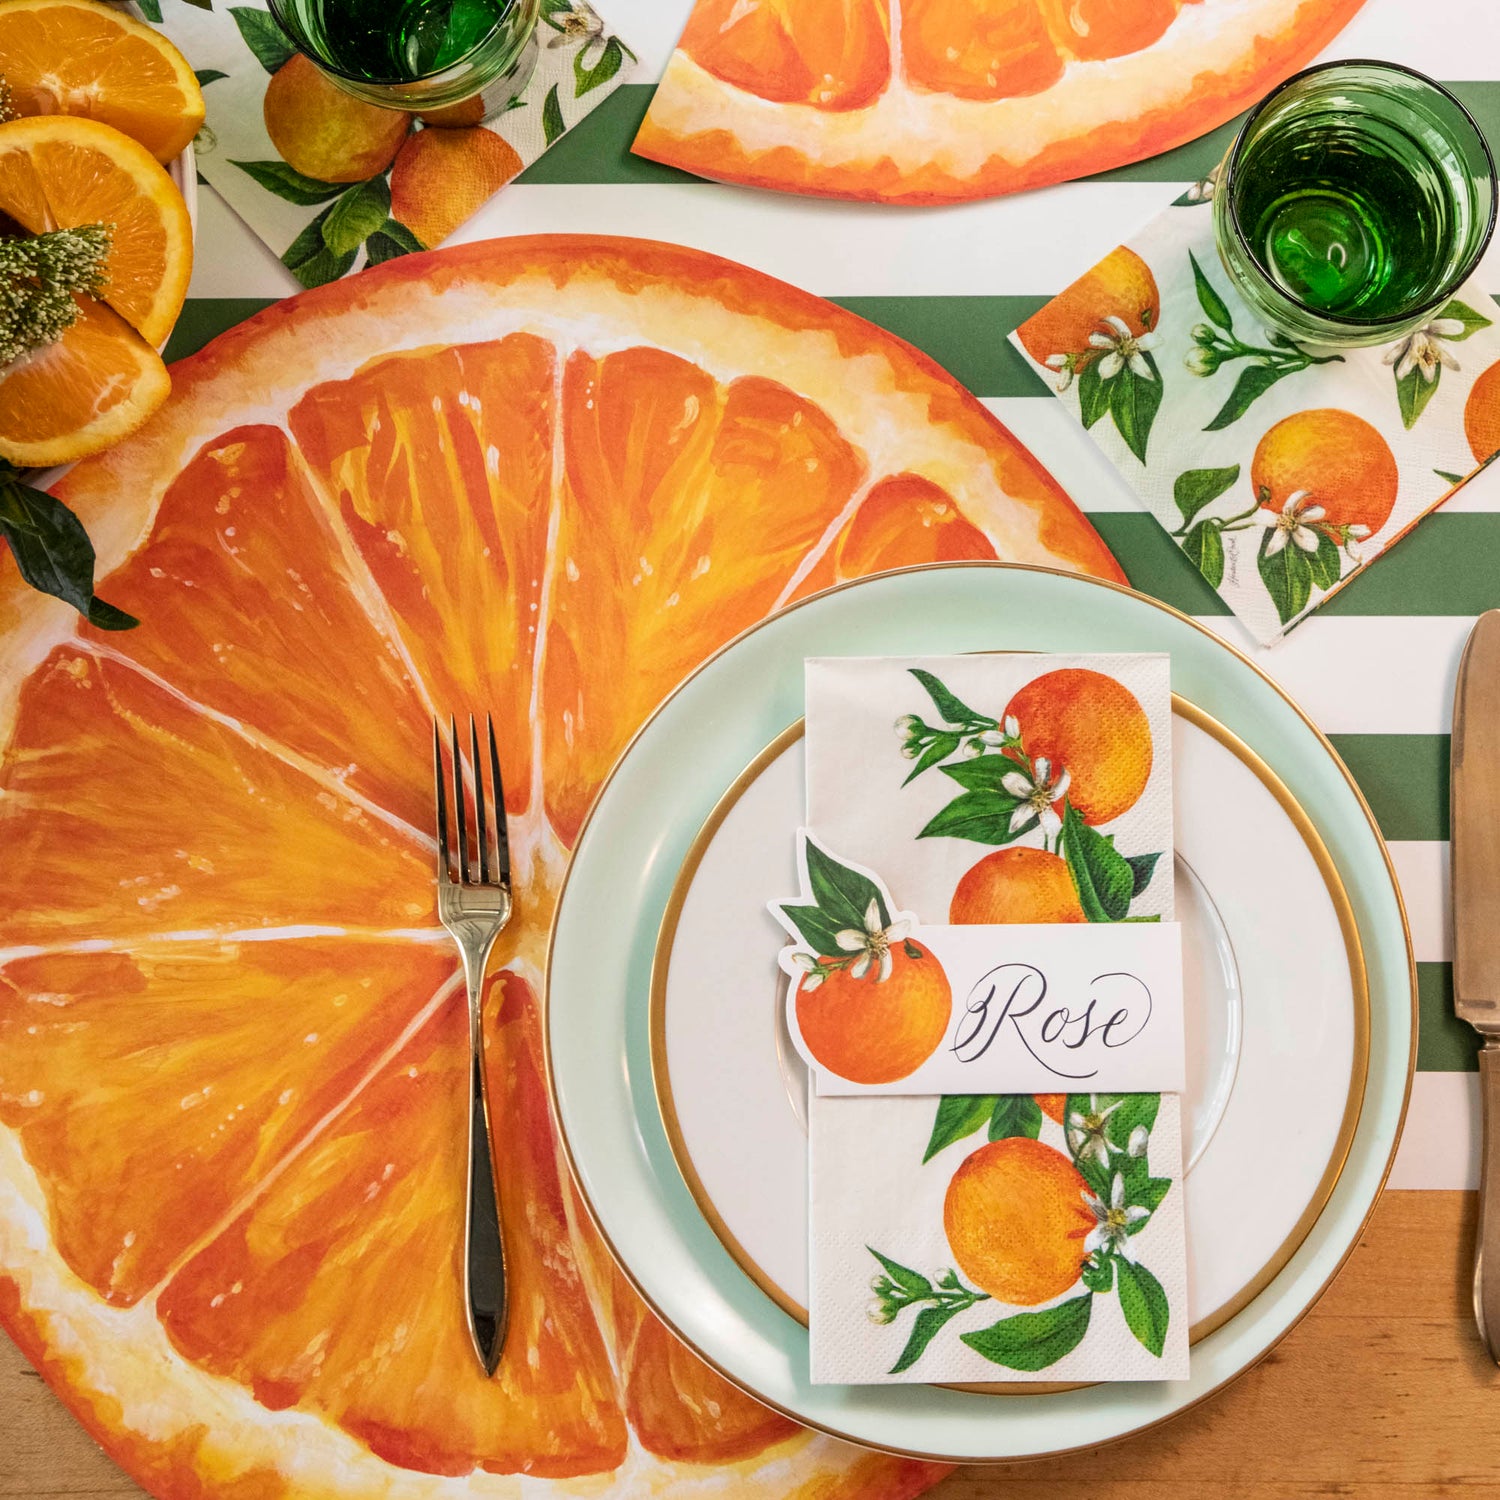 A vibrant citrus-themed place setting, featuring an Orange Orchard Guest Napkin centered on the plate, and an Orange Orchard Cocktail Napkin under the water glass.